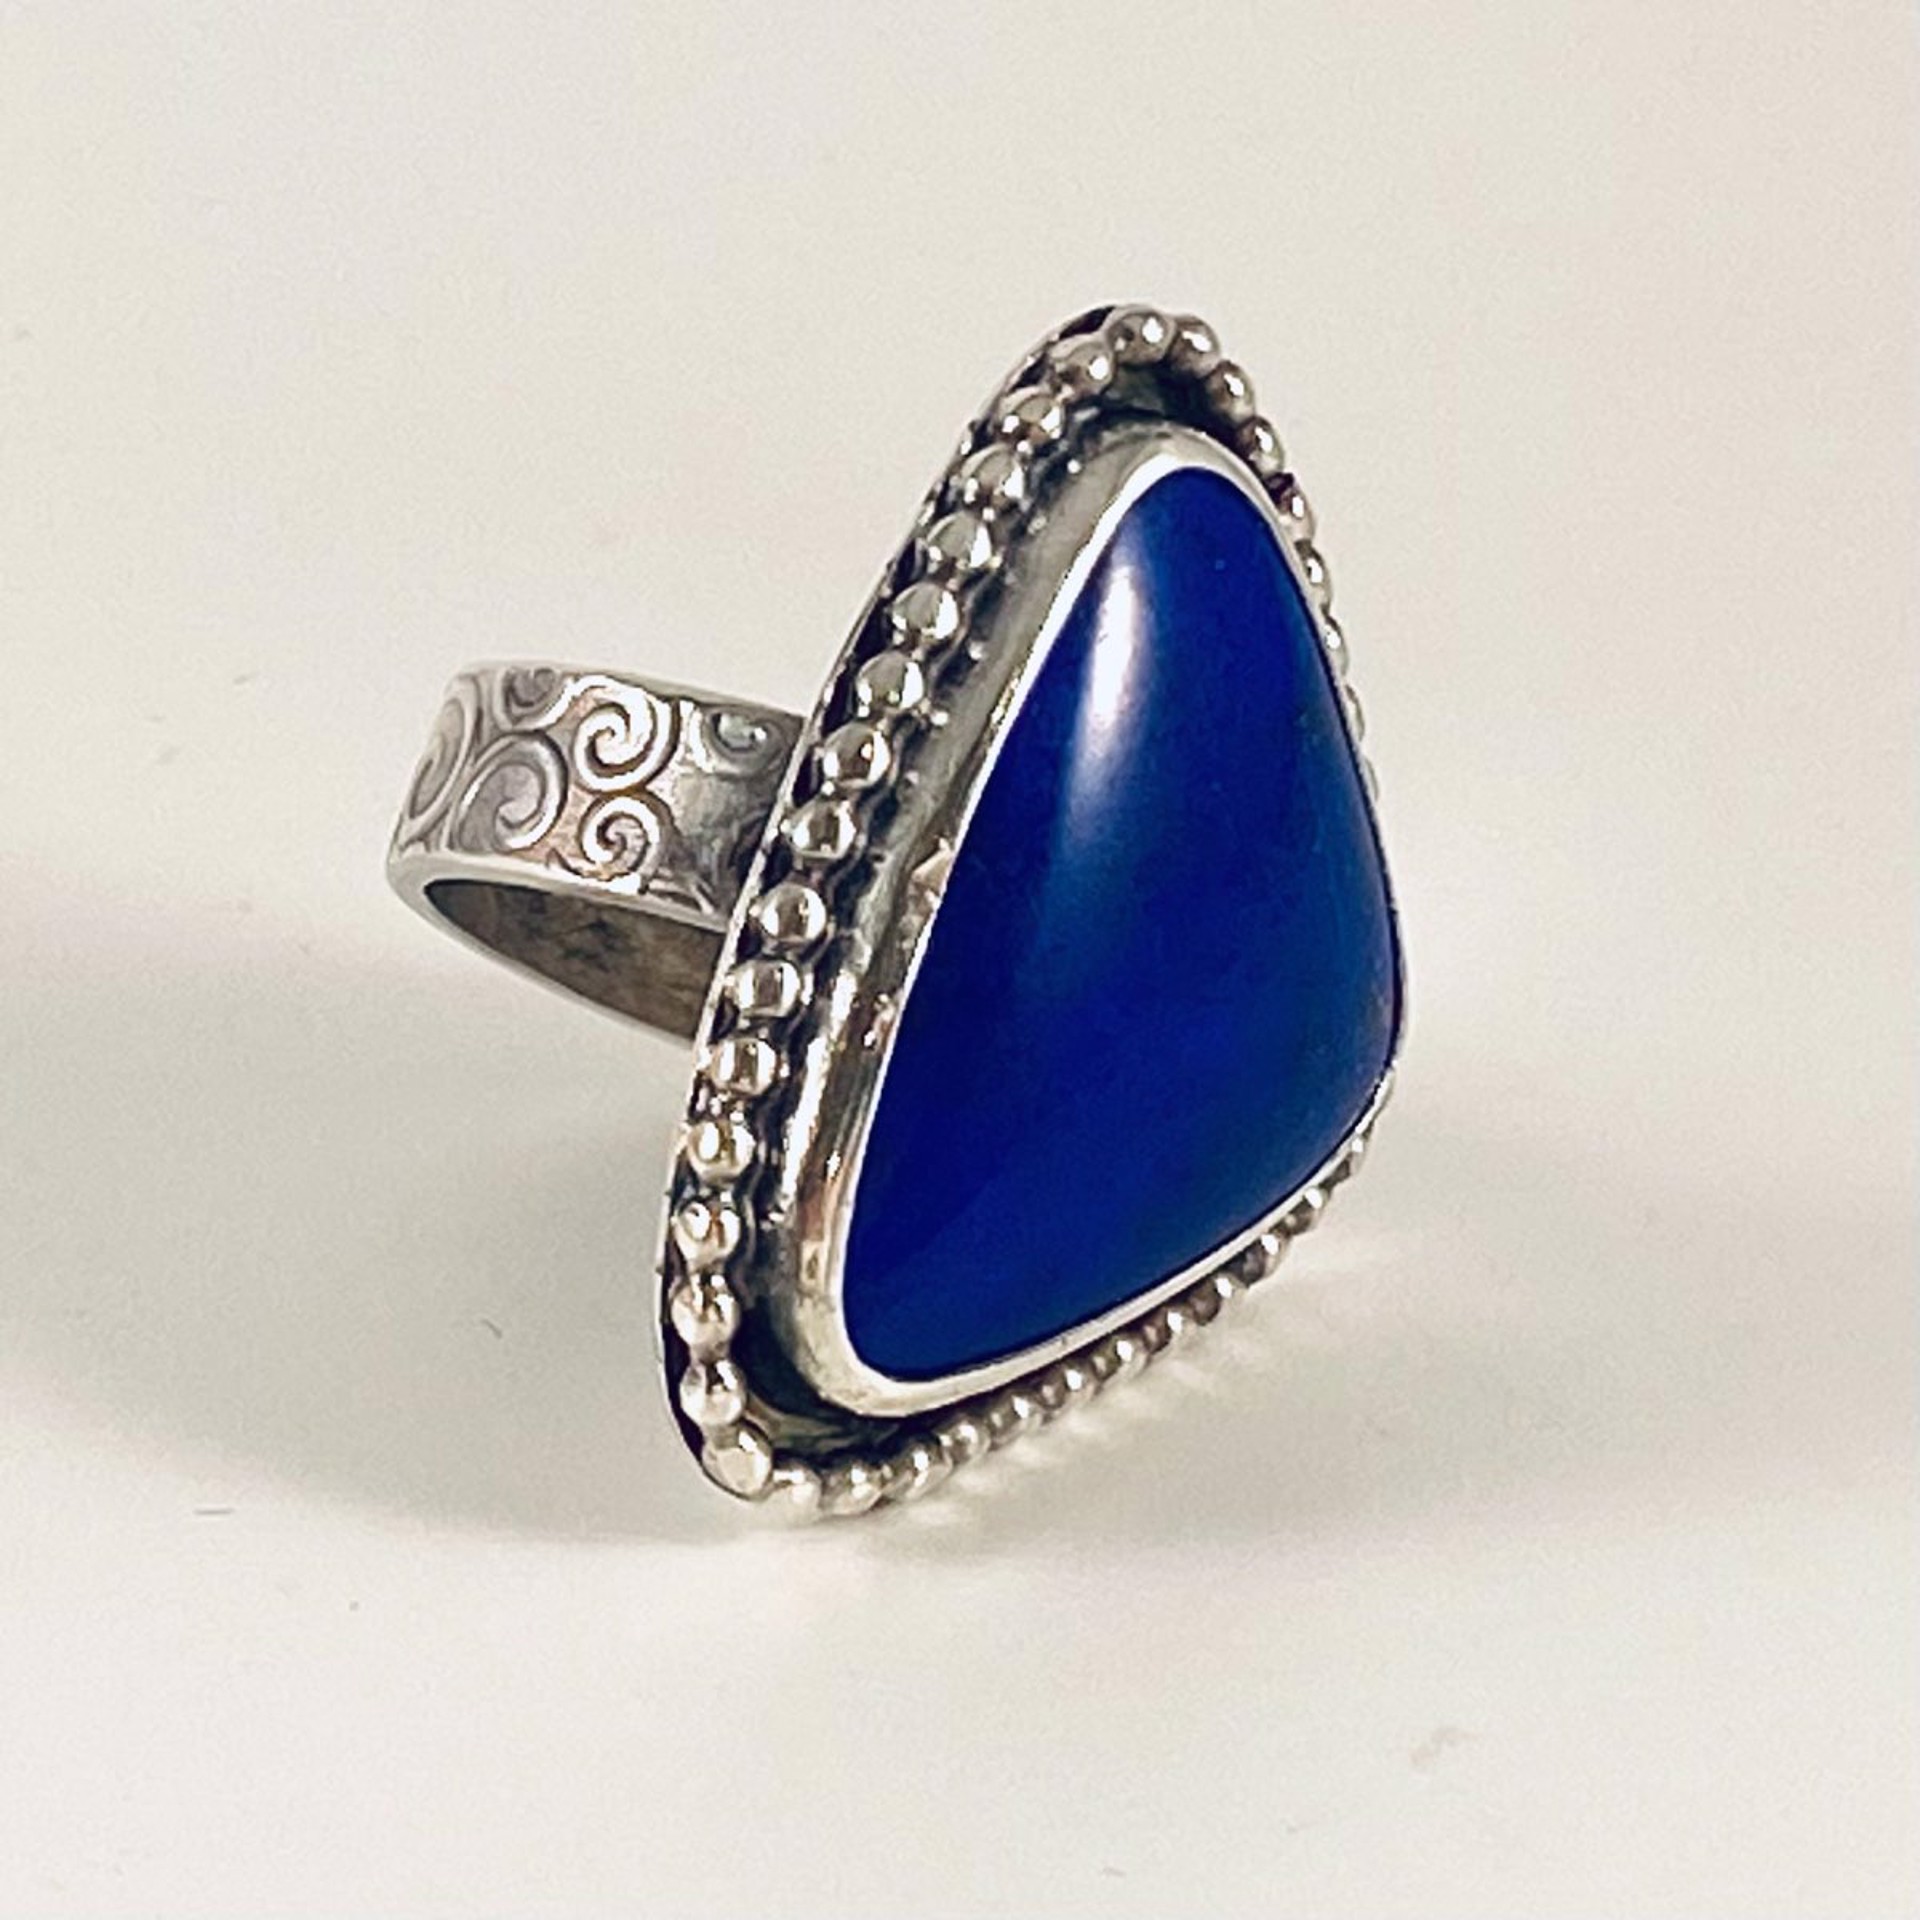 AB22-27 Triangle Lapis Lazuli Ring sz6.5 by Anne Bivens